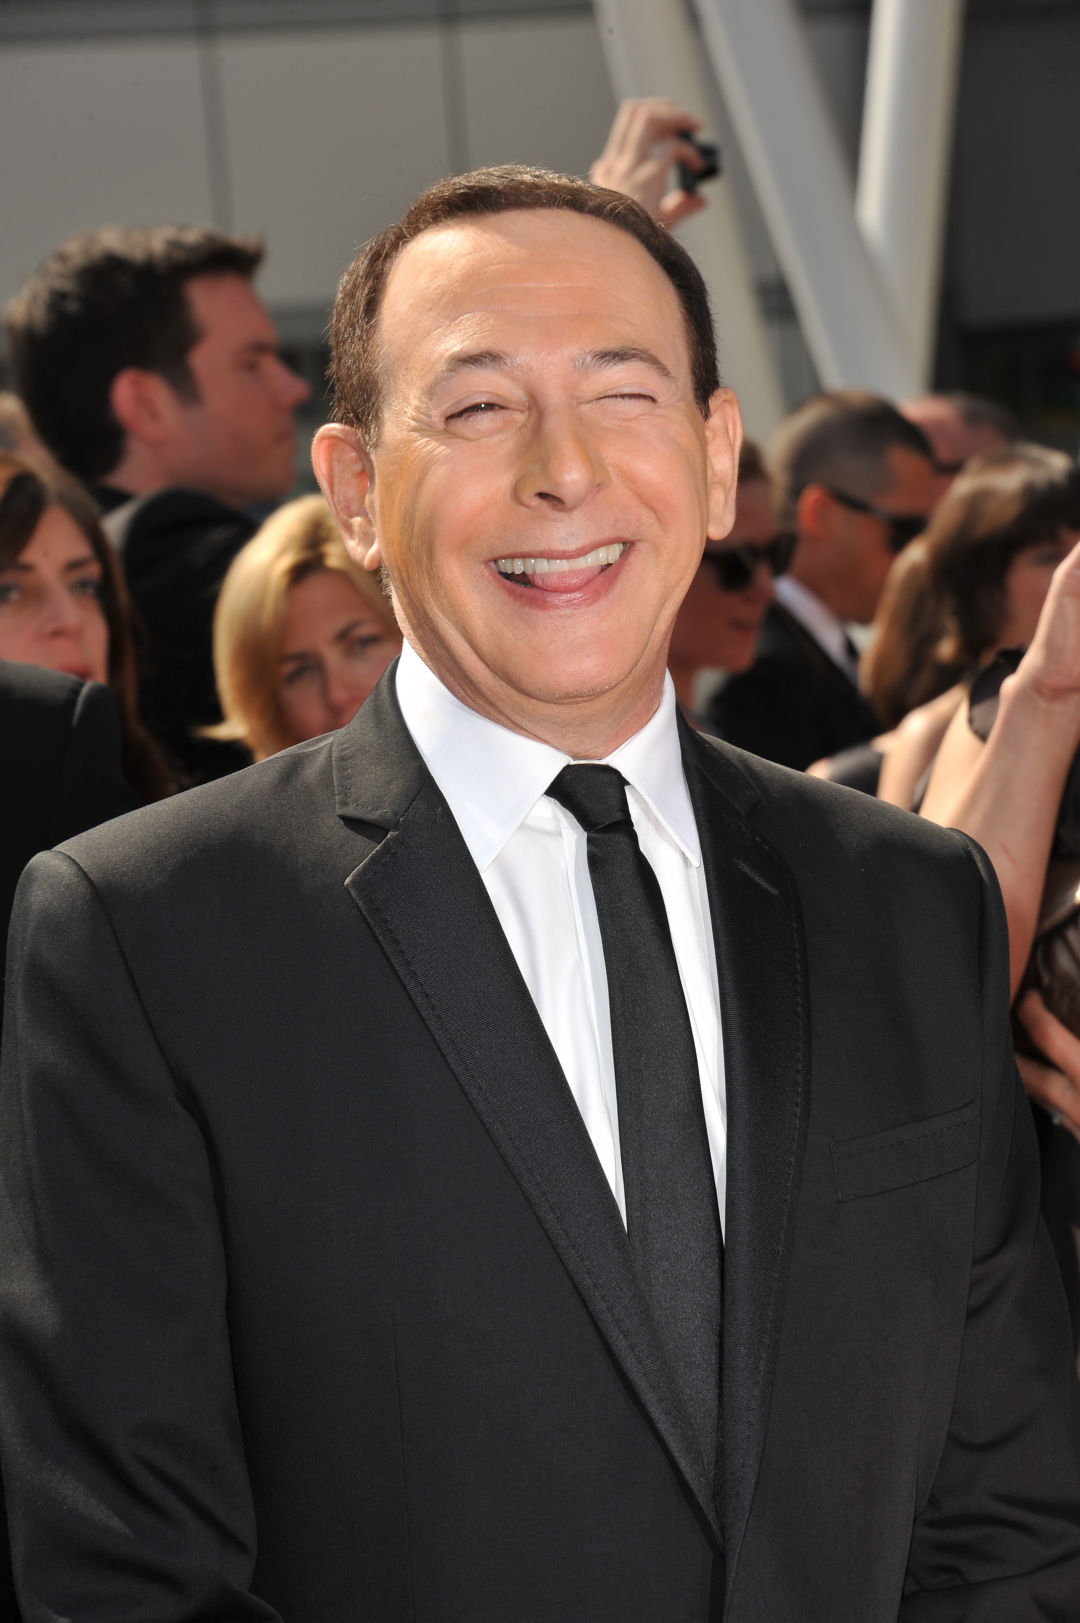 Paul Reubens at the 2011 Primetime Creative Arts Emmy Awards in Los Angeles.